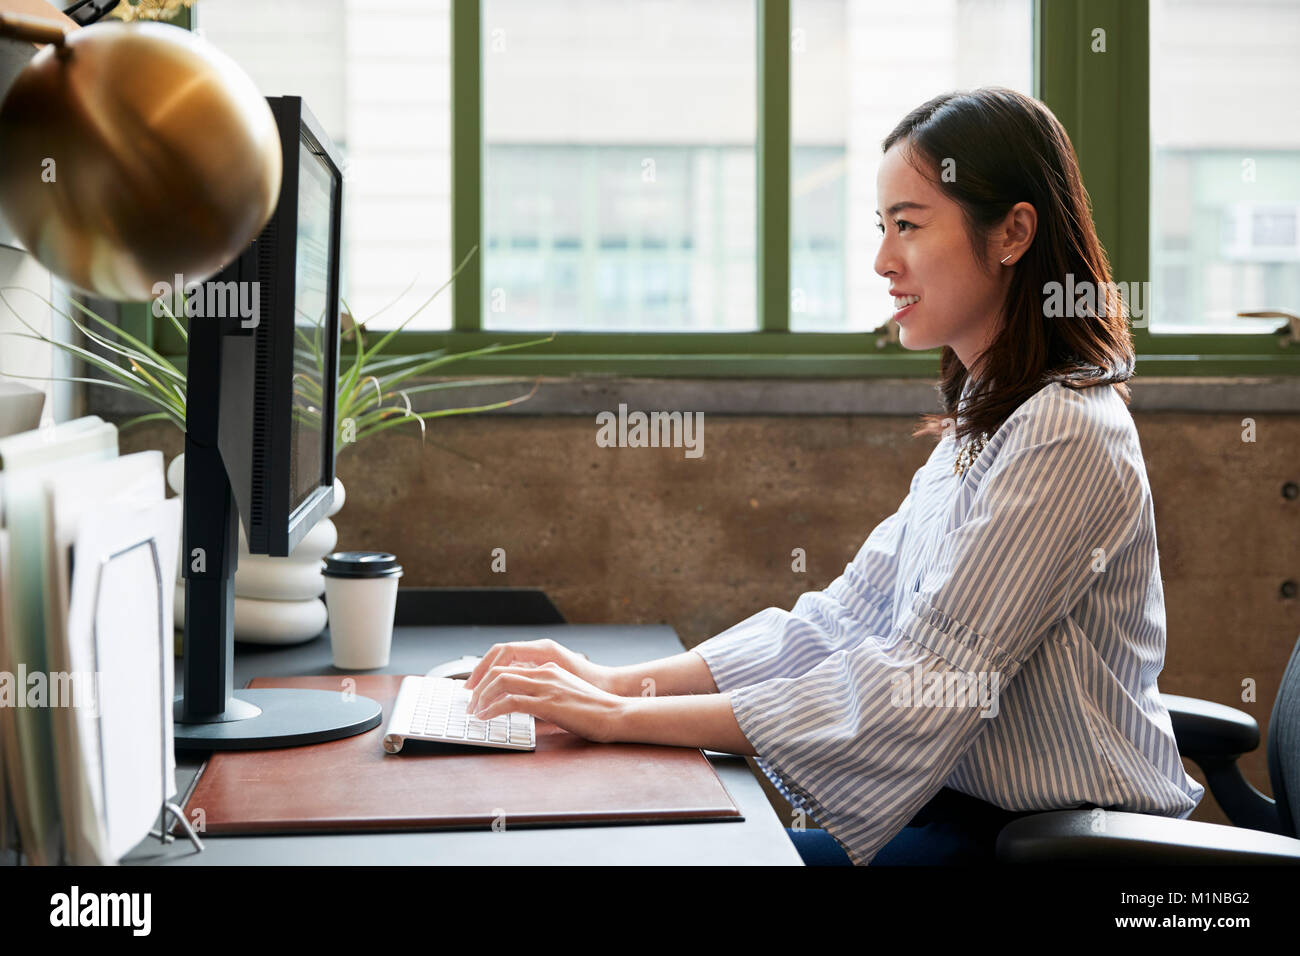 Chinese woman working at a computer in an office, side view Stock Photo